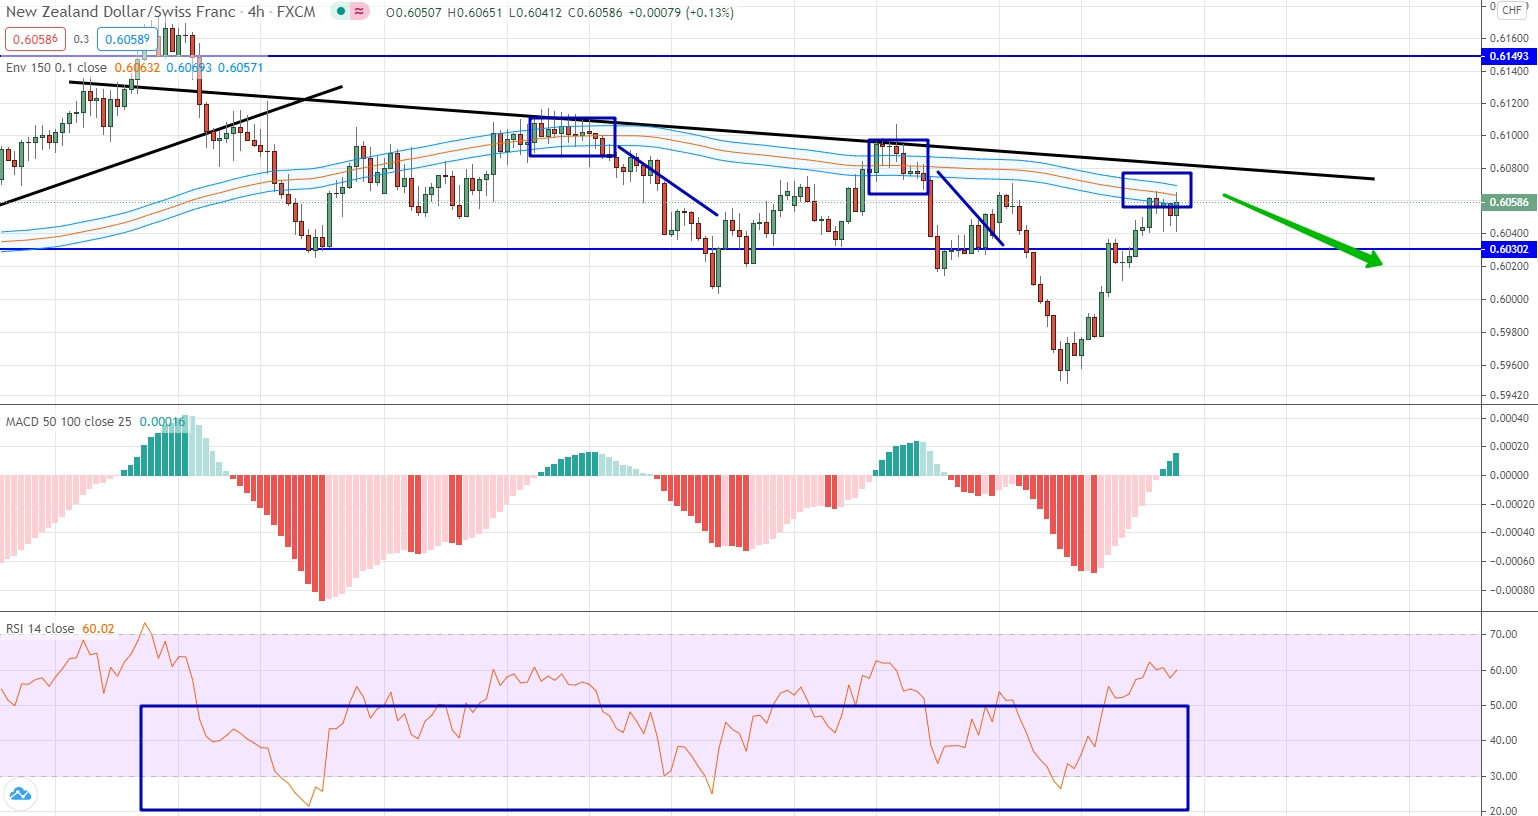 analysis of NZD/CHF by moving averages, RSI and MACD